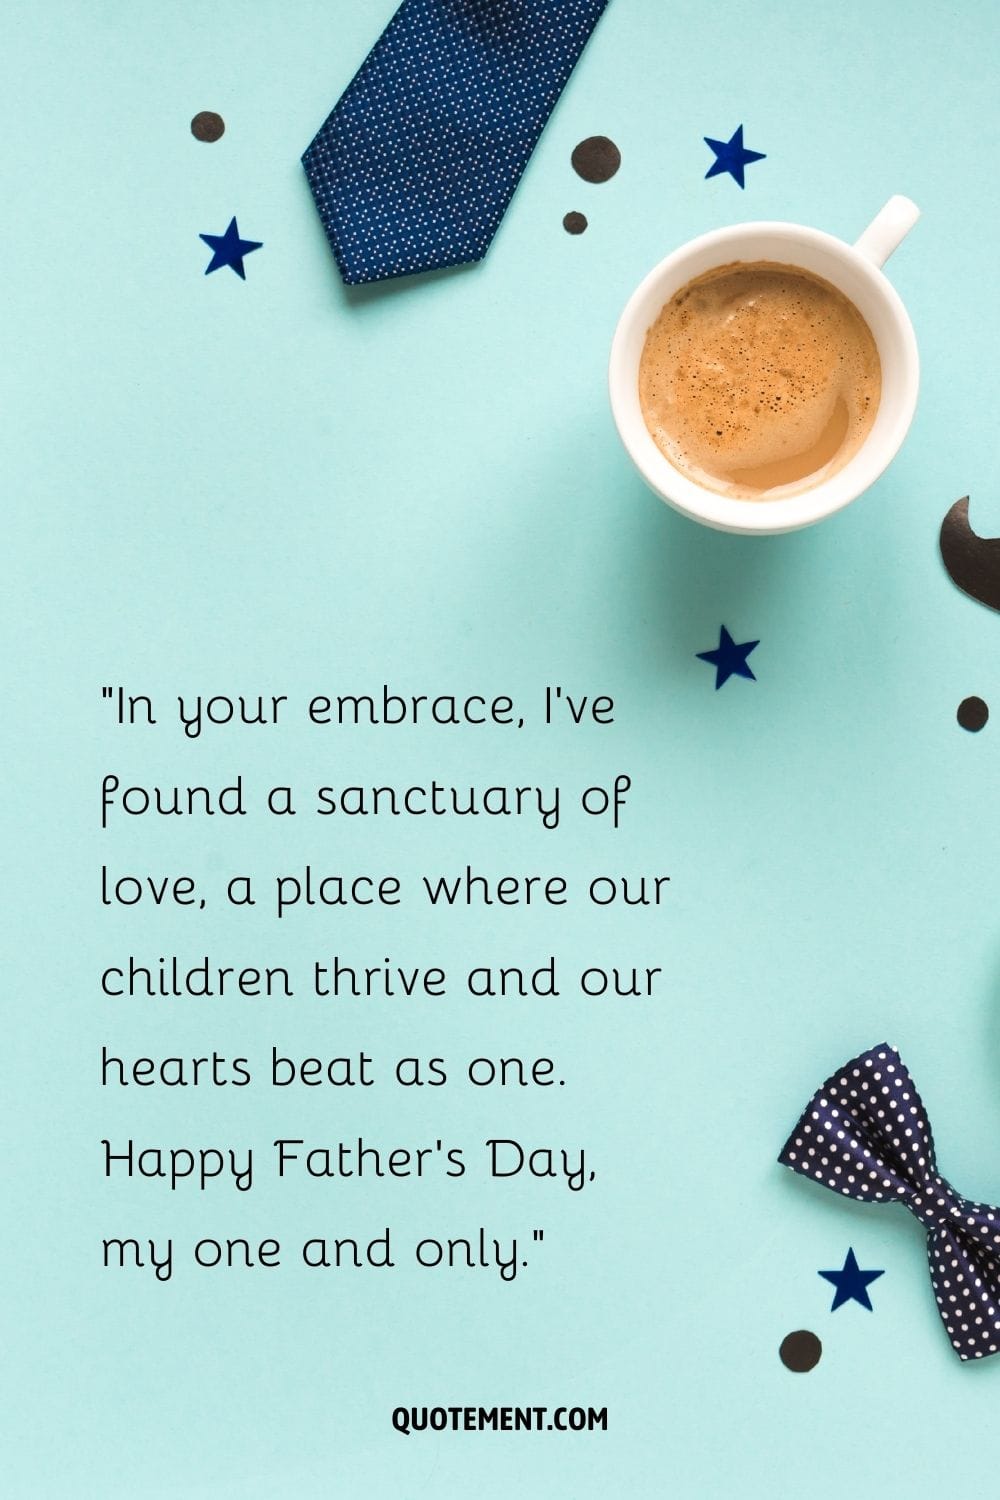 Coffee, tie, and bow on green backdrop representing the loveliest father's day message from wife
